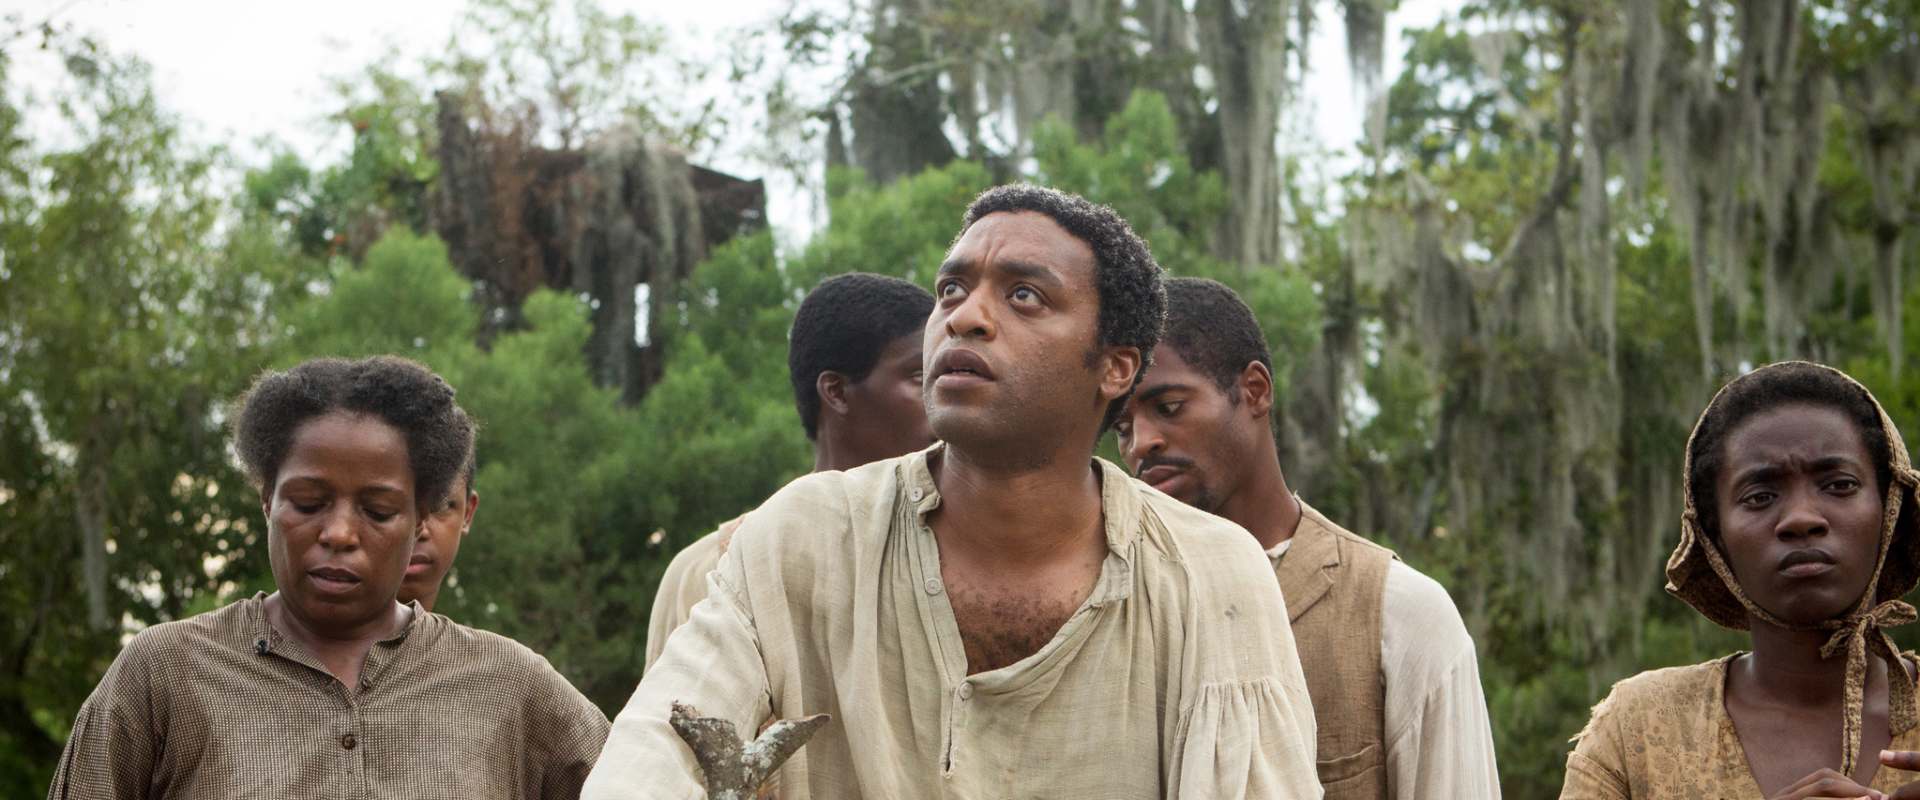 12 Years a Slave background 2